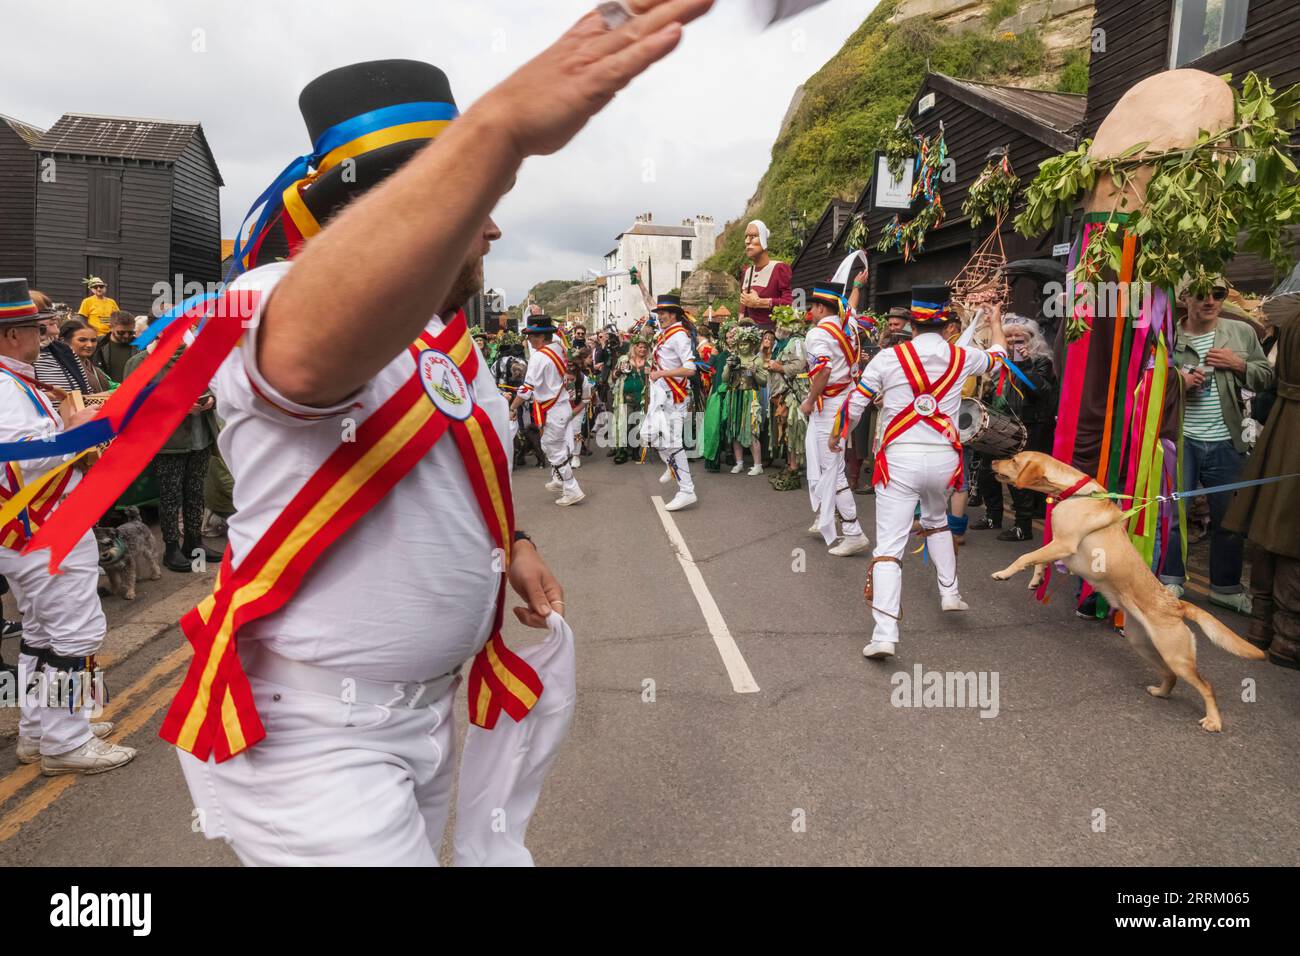 England, Sussex, East Sussex, Hastings, The Old Town, Morris Dancers in The Annual Jack in The Green Festival Stock Photo